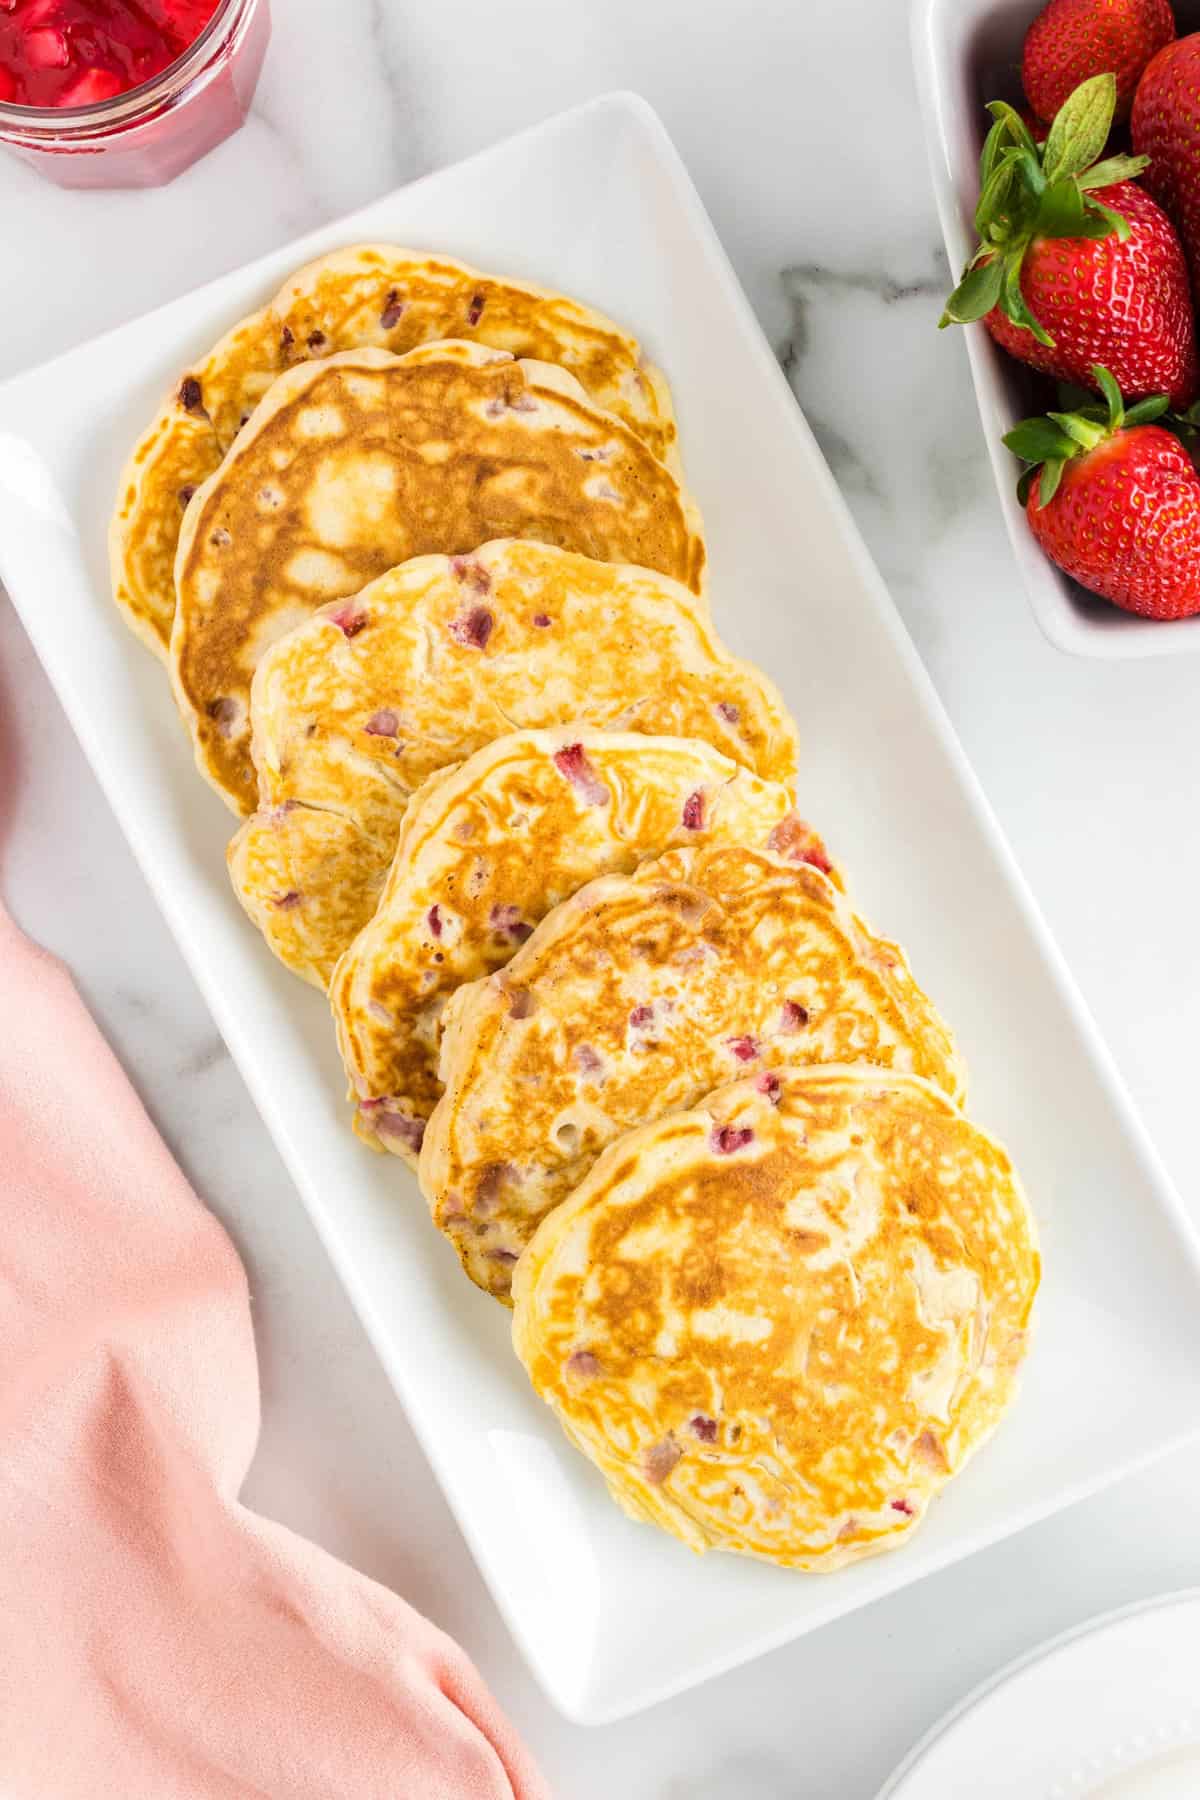 Strawberry Pancakes Hot Off the Griddle